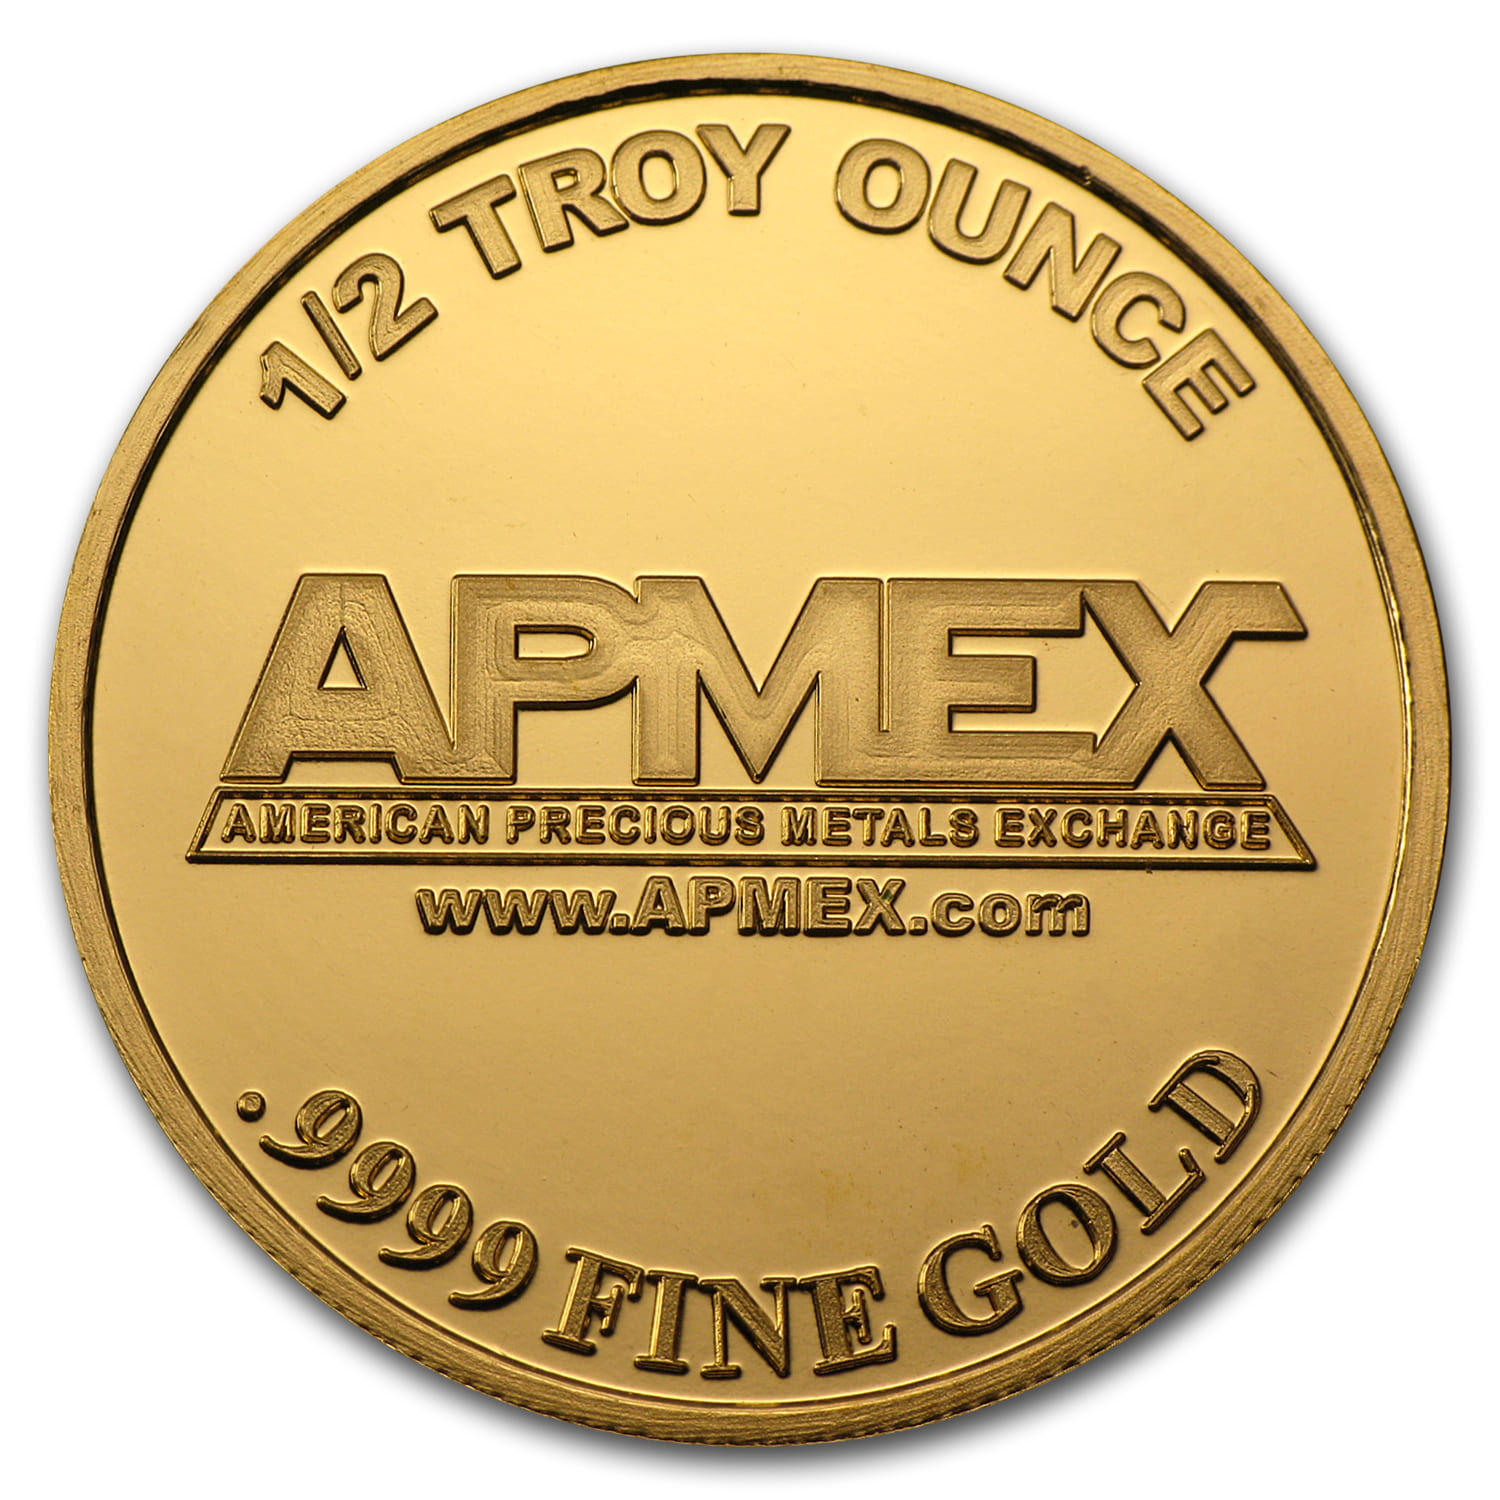 ampex coins for sale